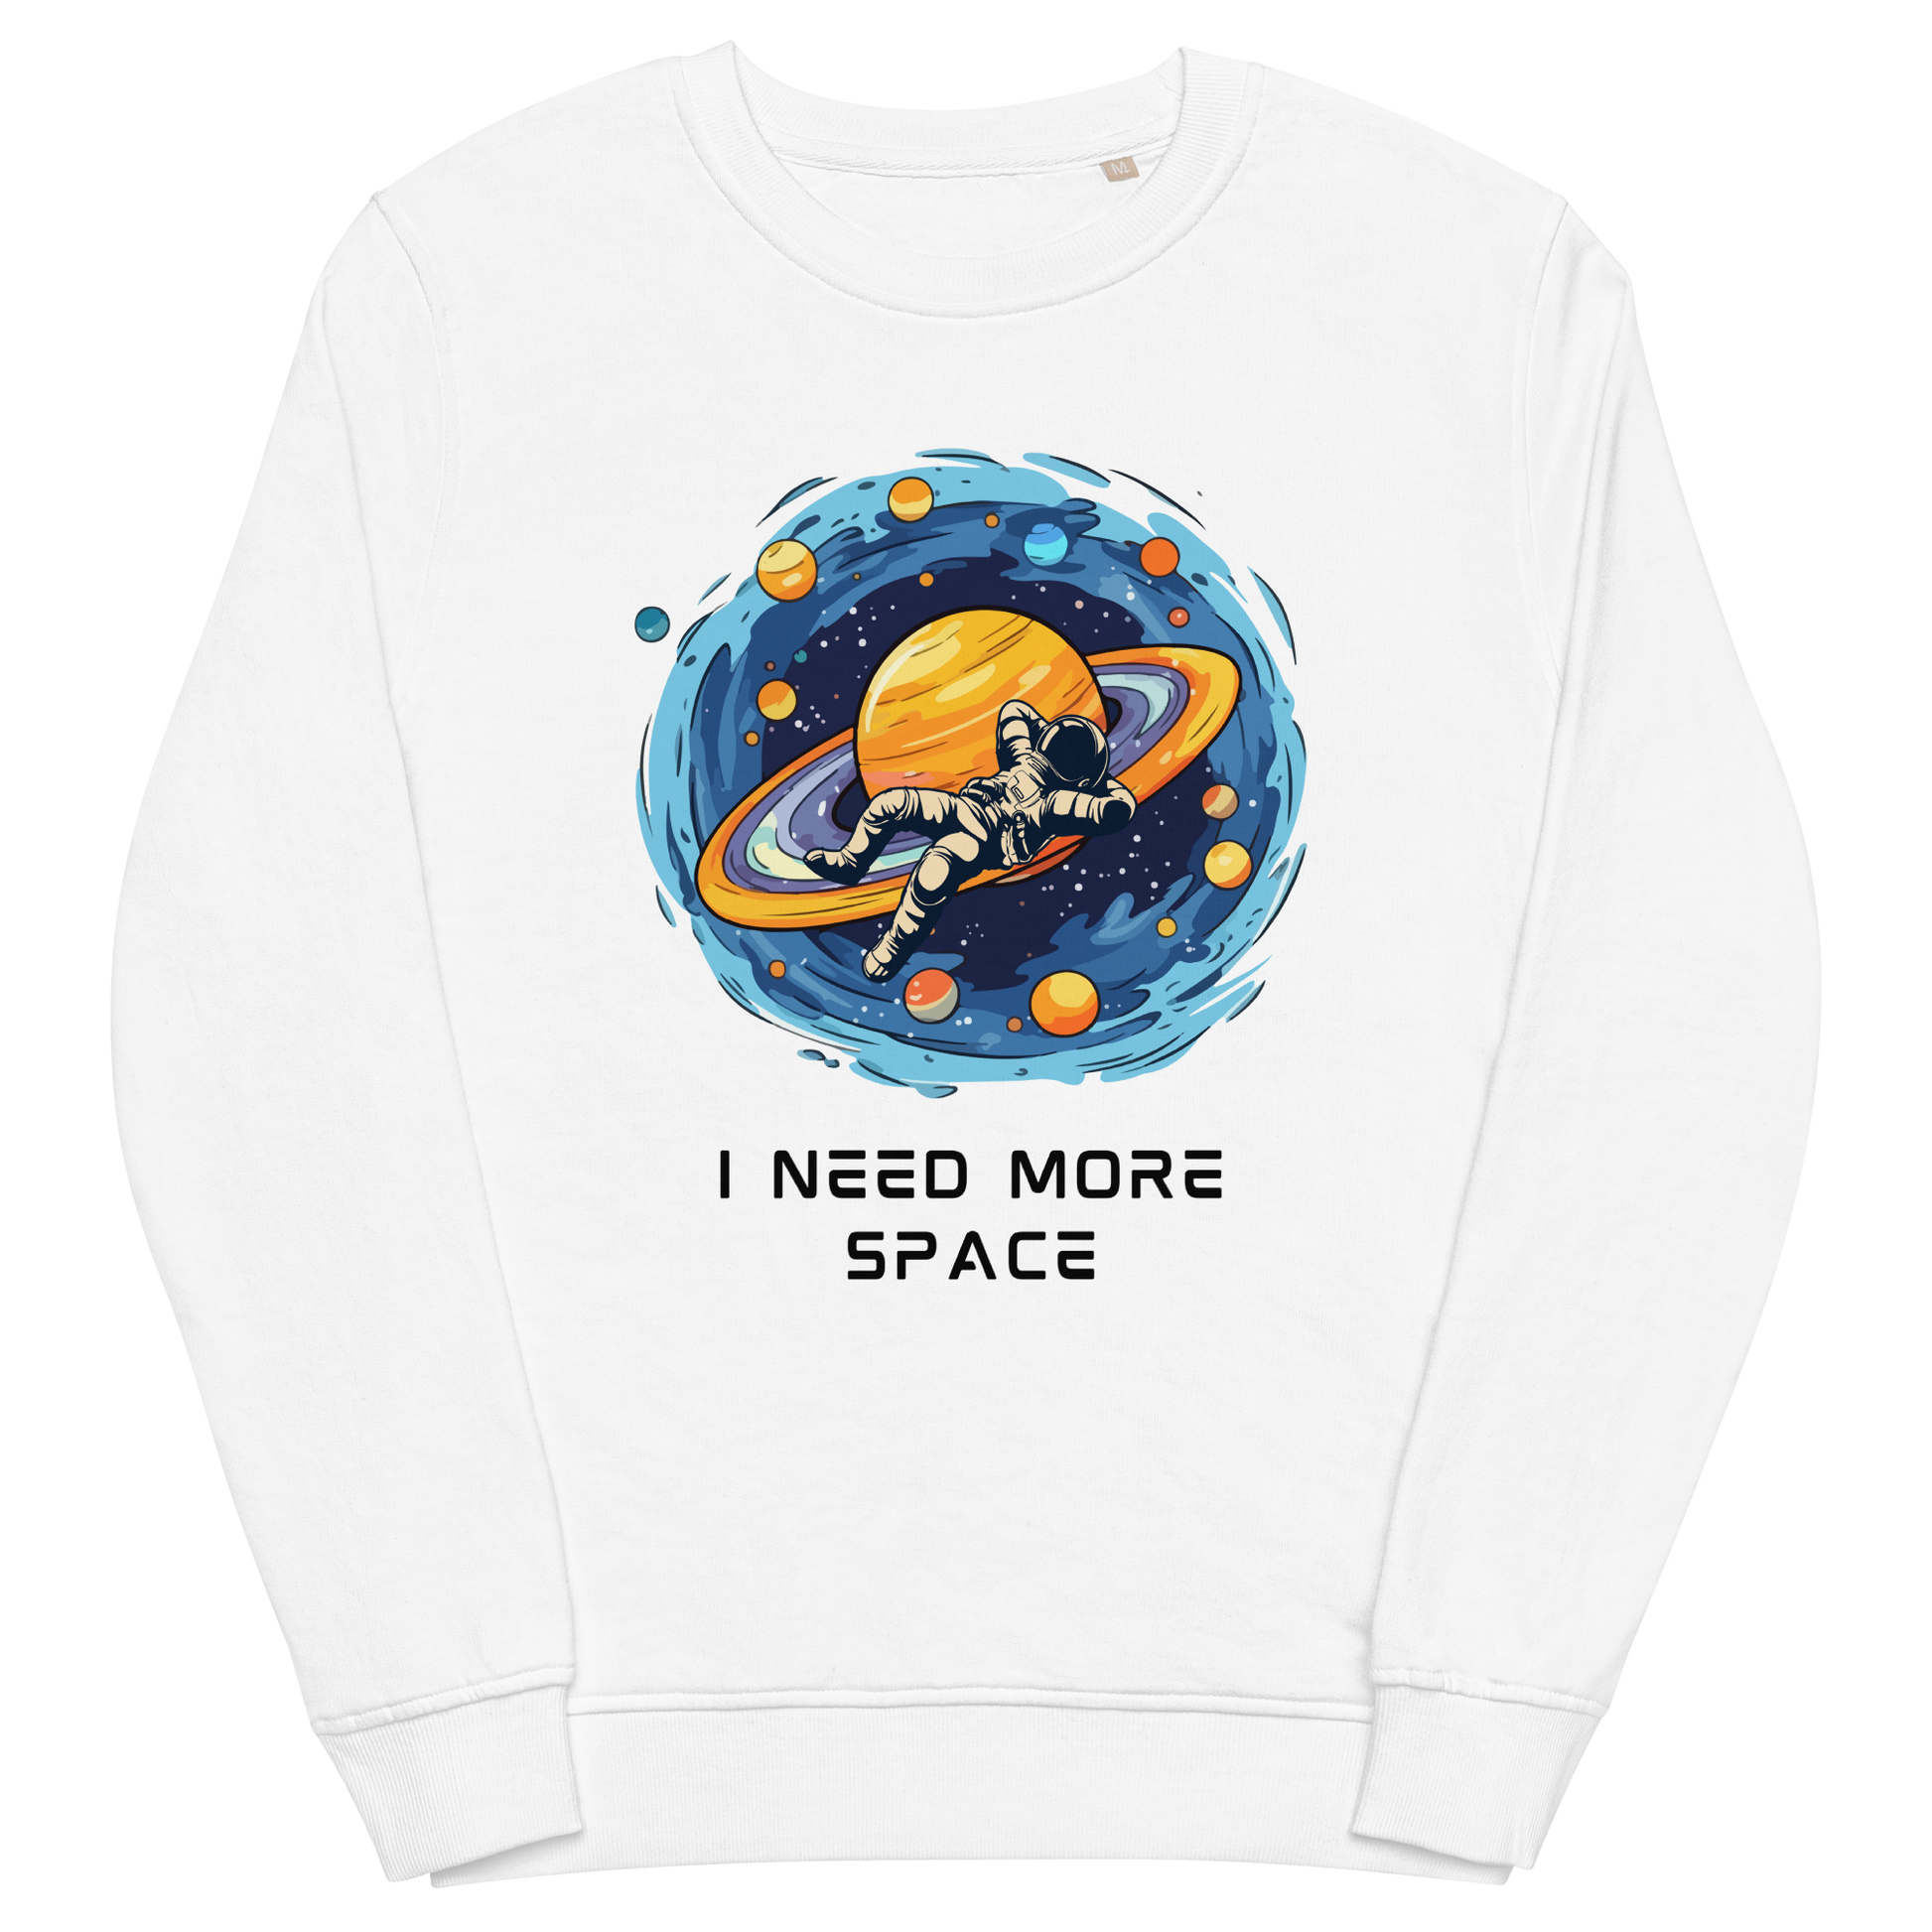 White Organic Cotton Astronaut Sweatshirt featuring a captivating I Need More Space graphic on the chest - Funny Graphic Space Sweatshirts - Boozy Fox